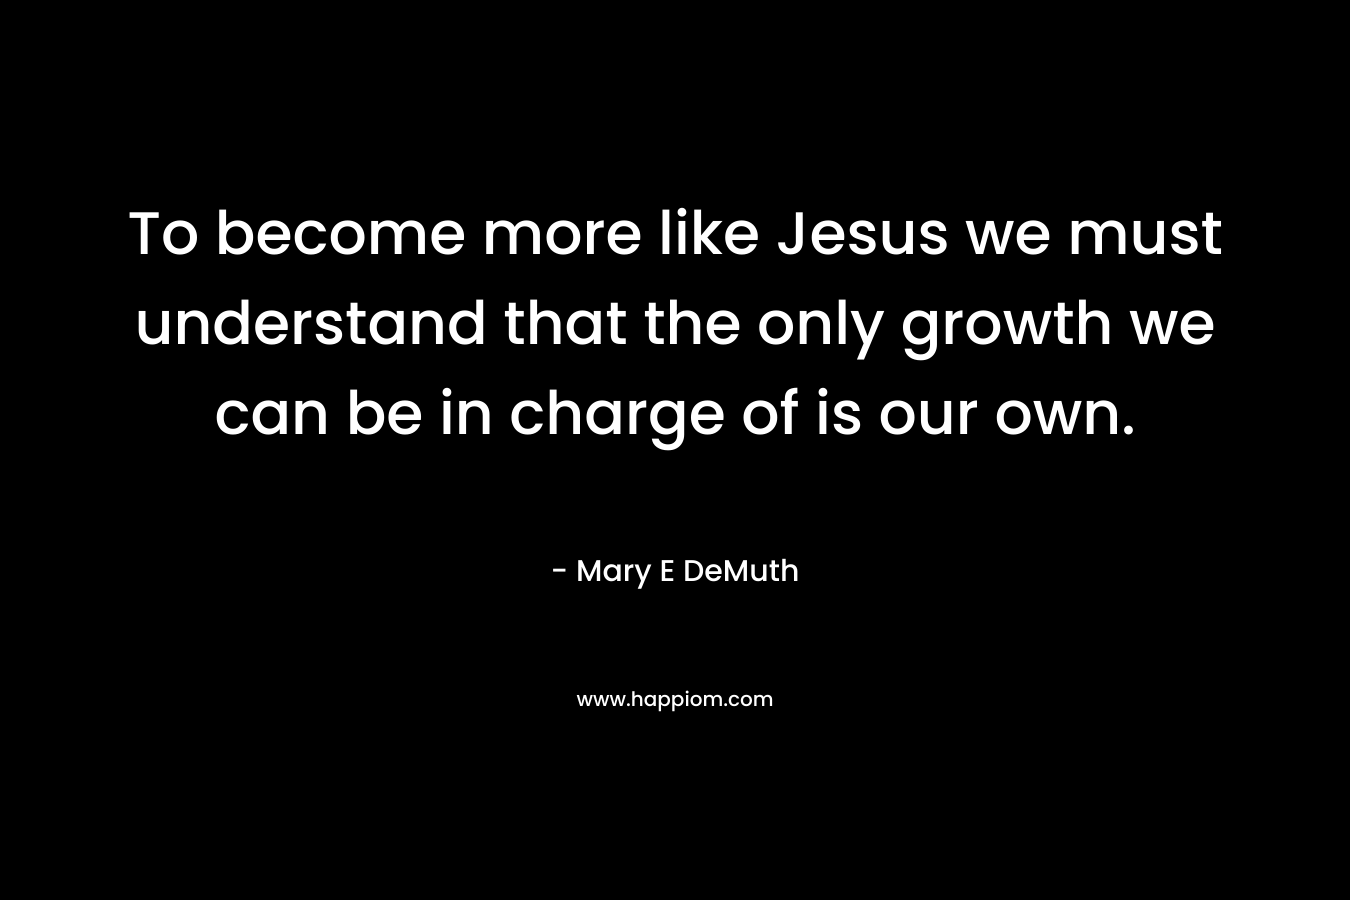 To become more like Jesus we must understand that the only growth we can be in charge of is our own.